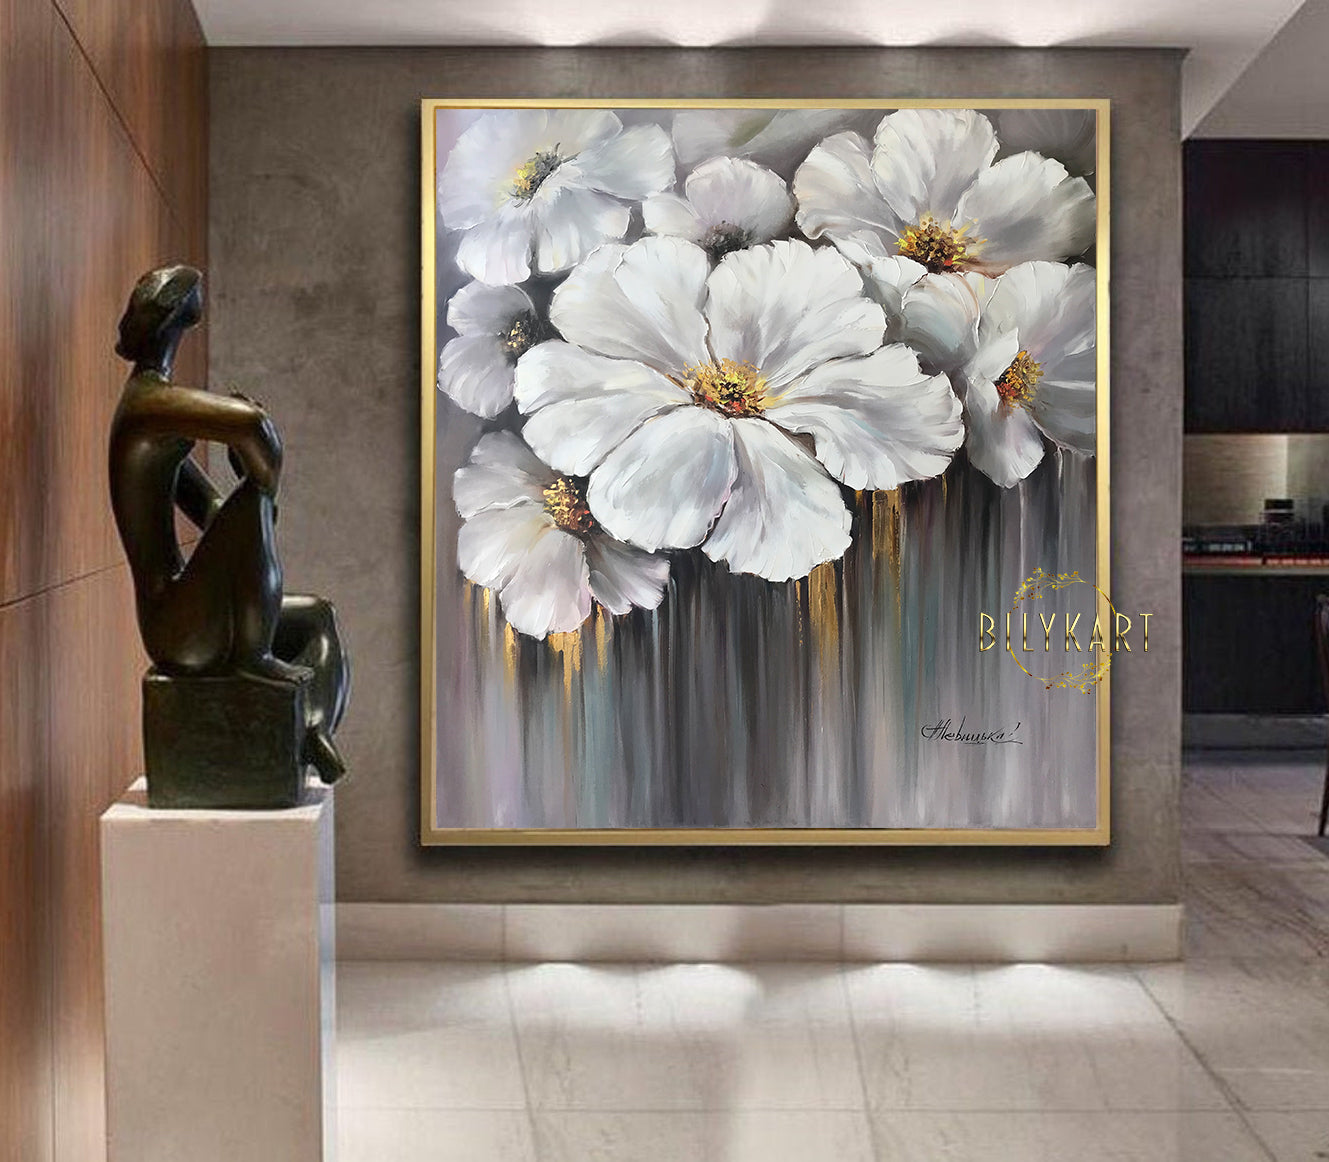 Extra Large White Flowers Painting on Canvas White and Gold Flower Wall Decor Flowers in Bloom Oil Painting